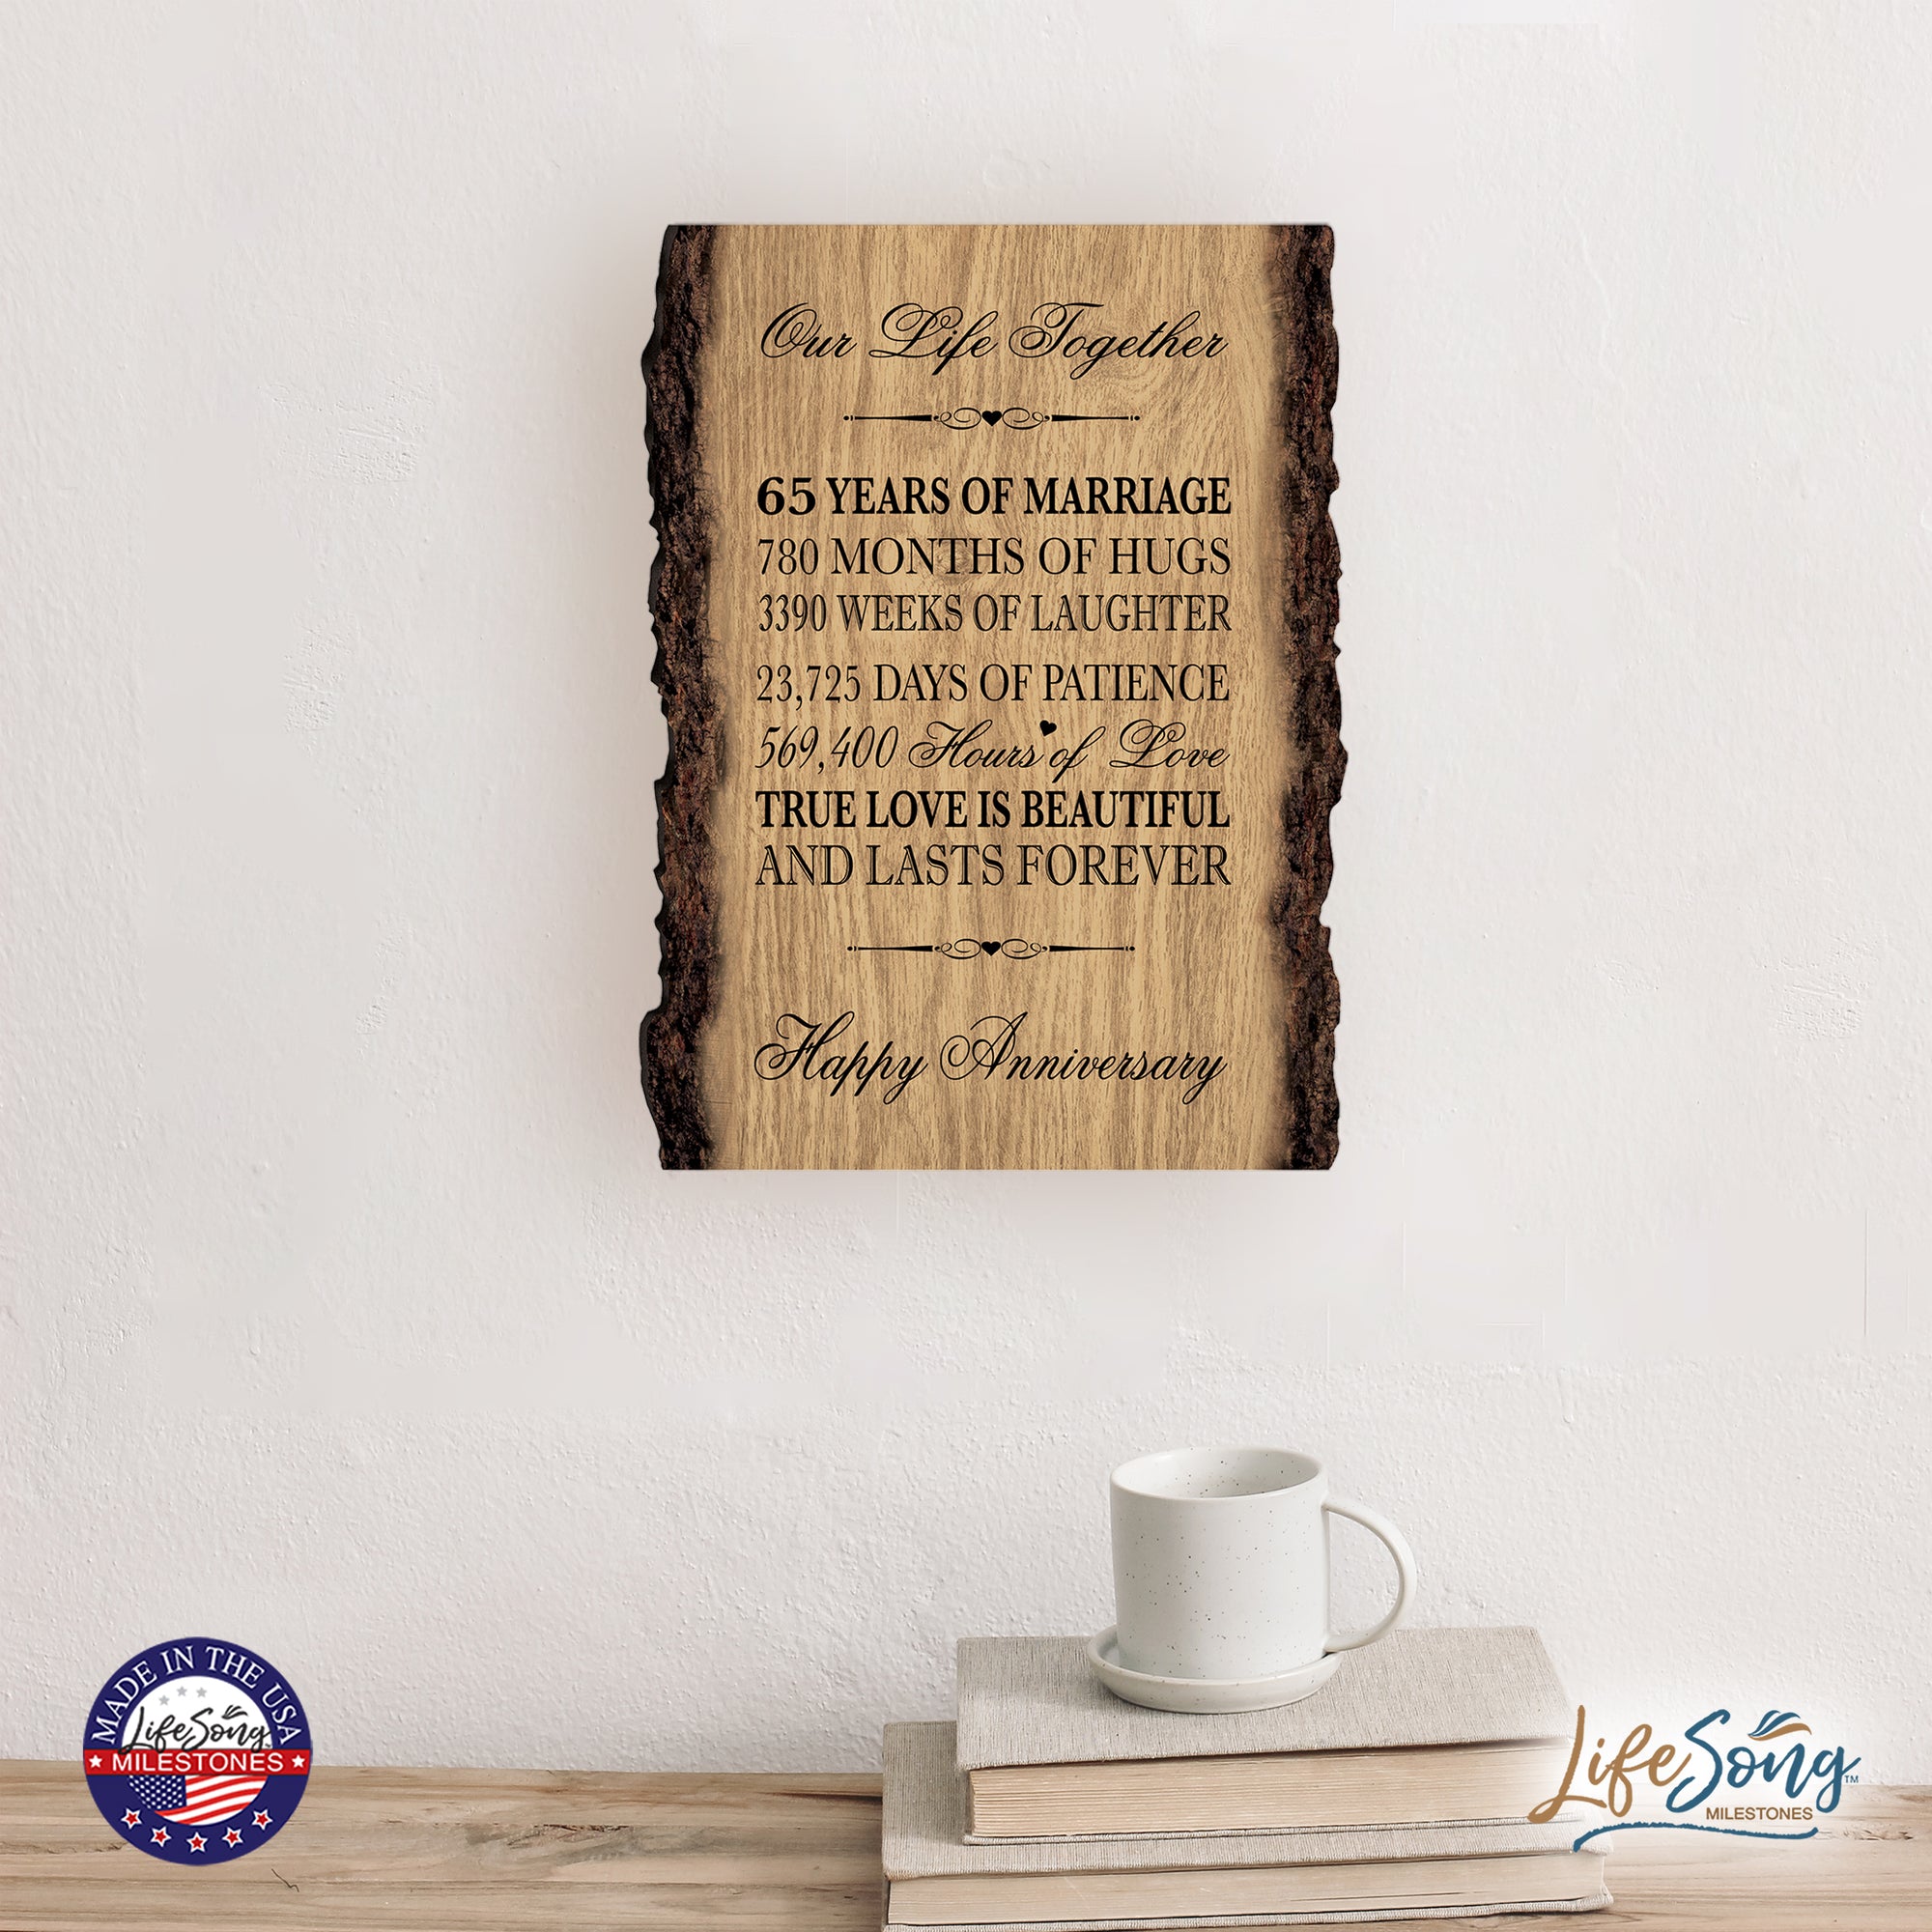 Rustic Wedding Anniversary 9x12 Barky Wall Plaque Gift For Parents, Grandparents New Couple - 65 Years Of Marriage